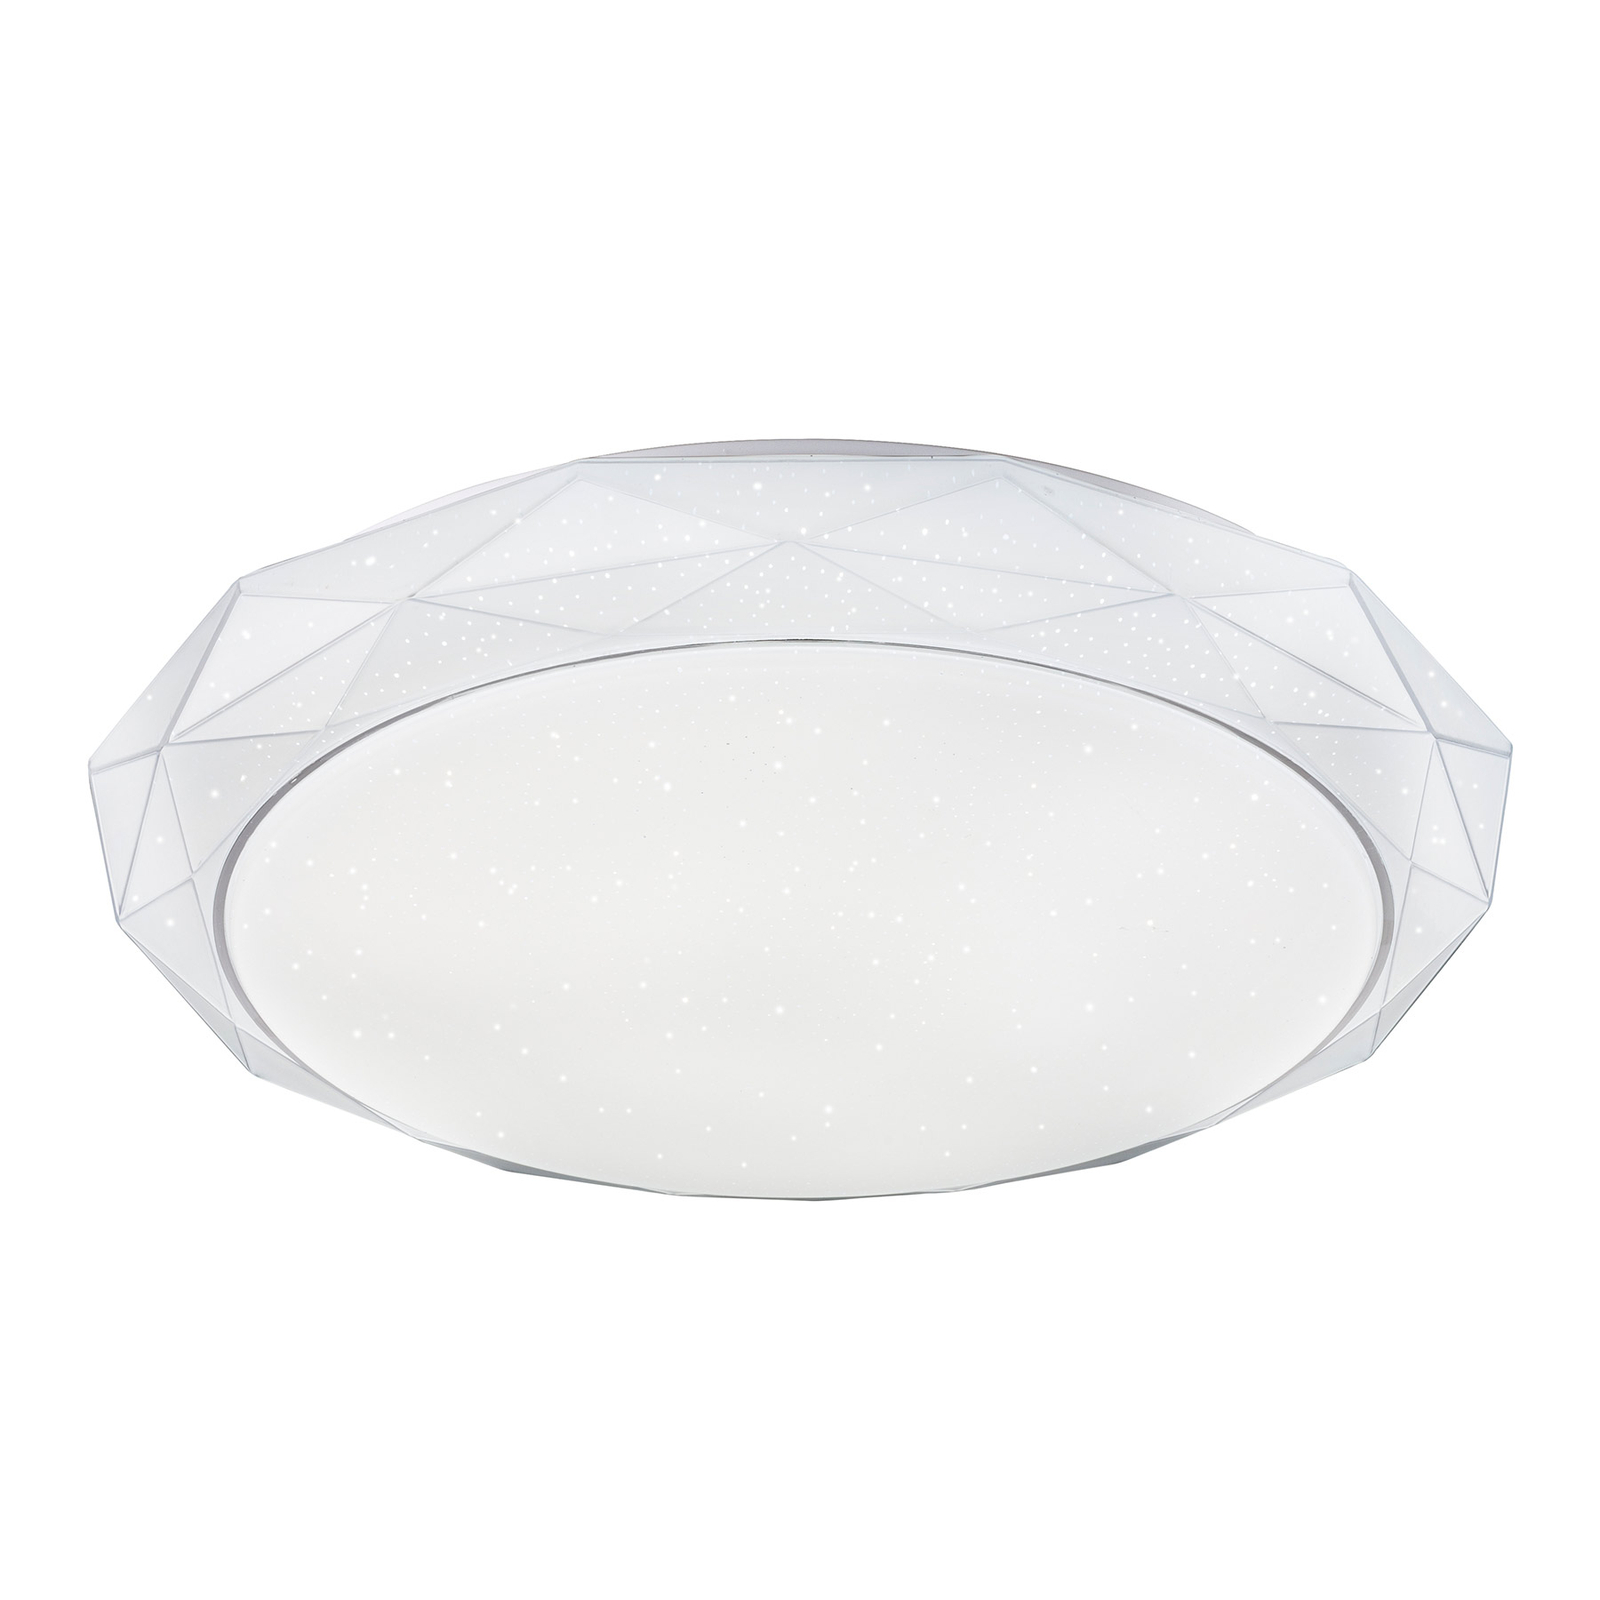 Andi LED ceiling light, colour change, dimmable